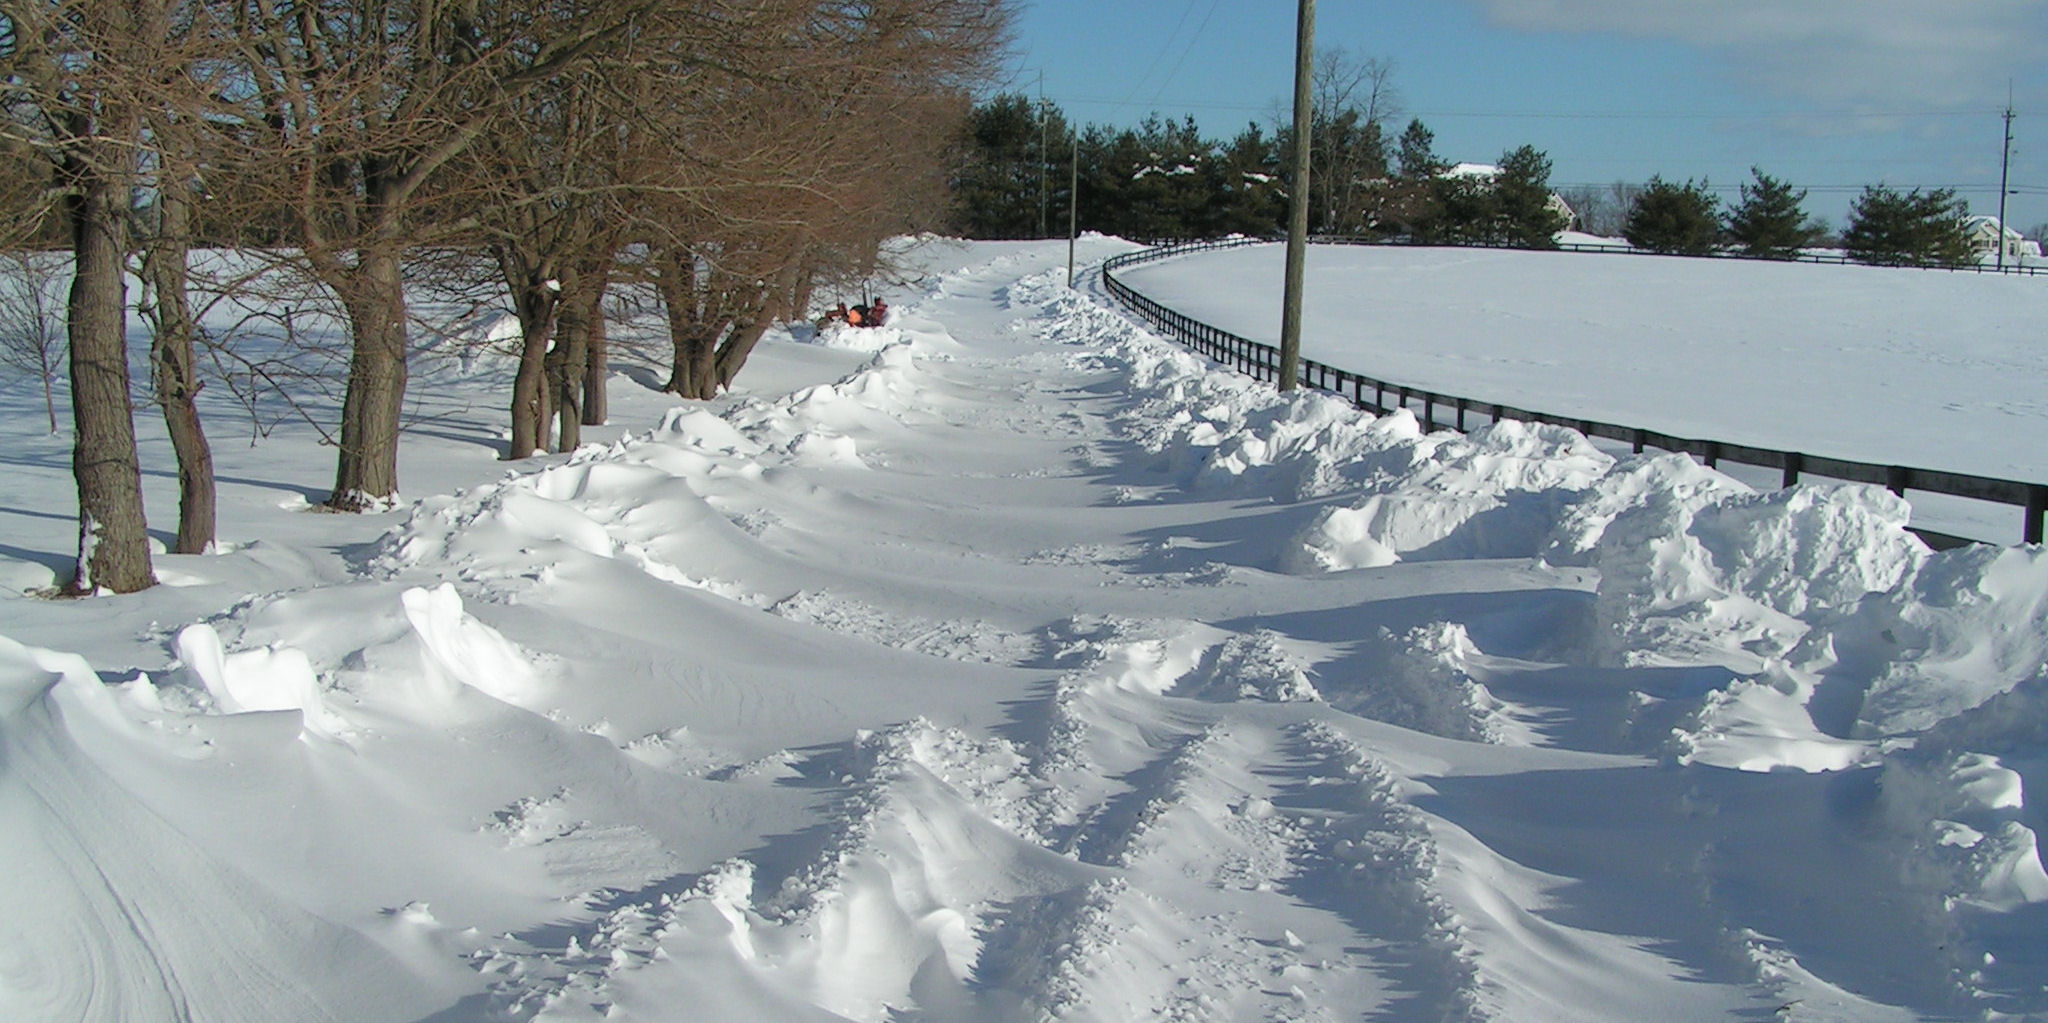 The driveway after an especially heavy snow